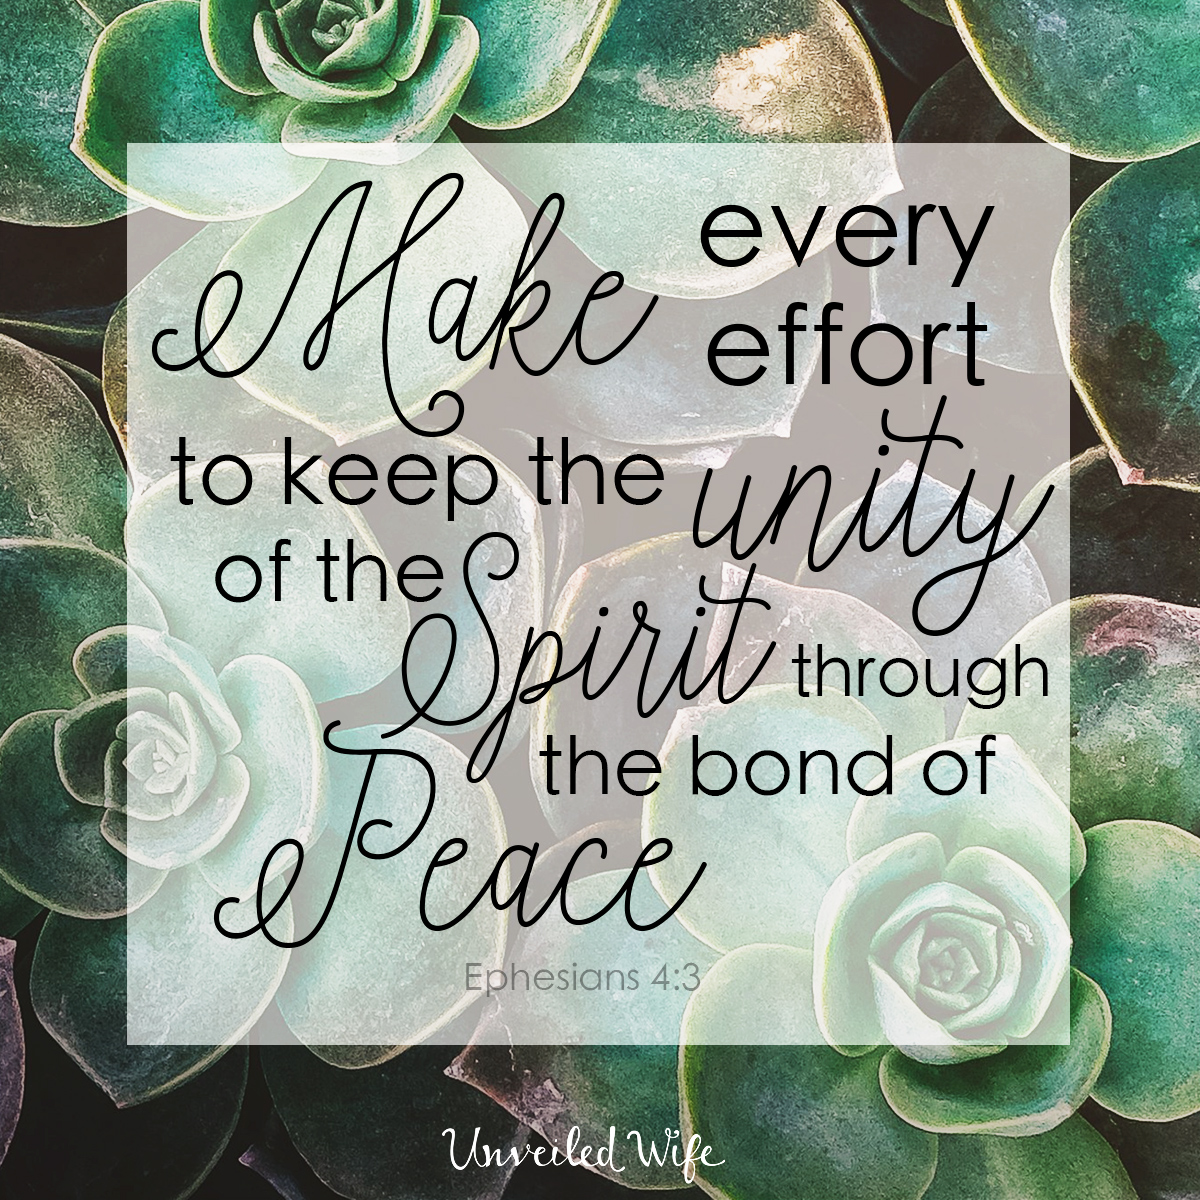 Being A Peacemaker & Bearing With One Another In Love